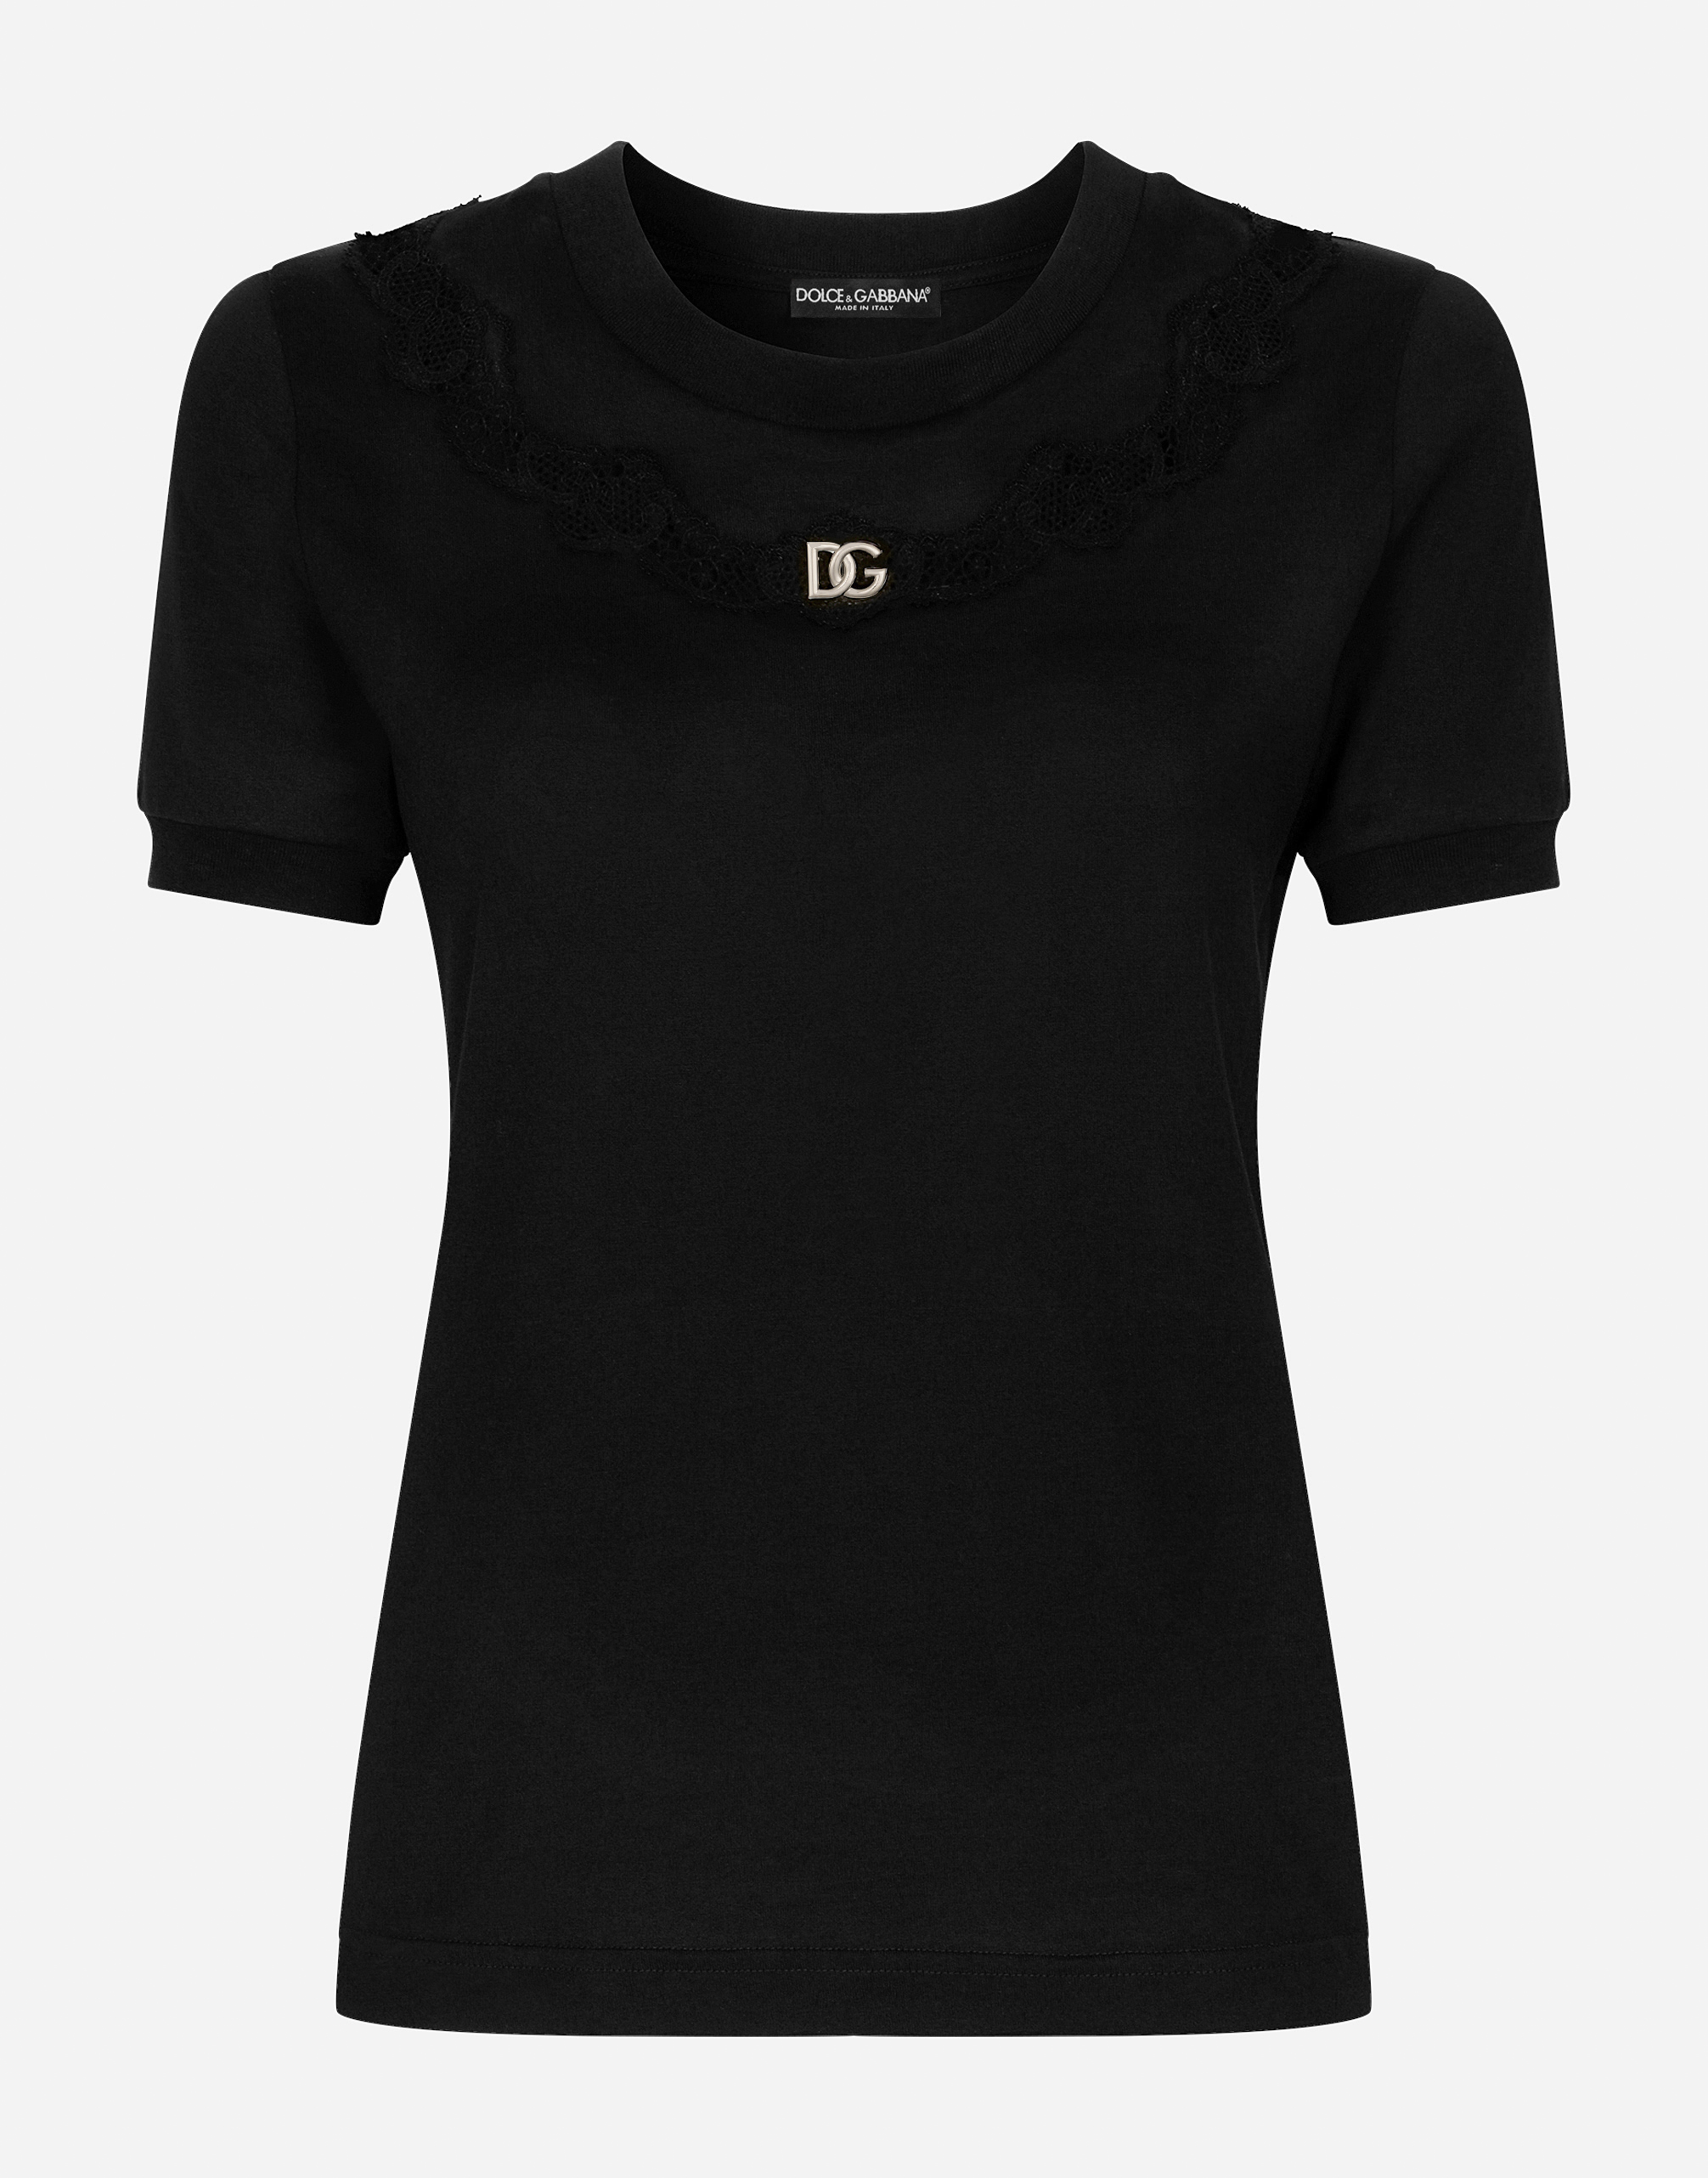 Jersey T-shirt with DG logo and lace inserts in Black